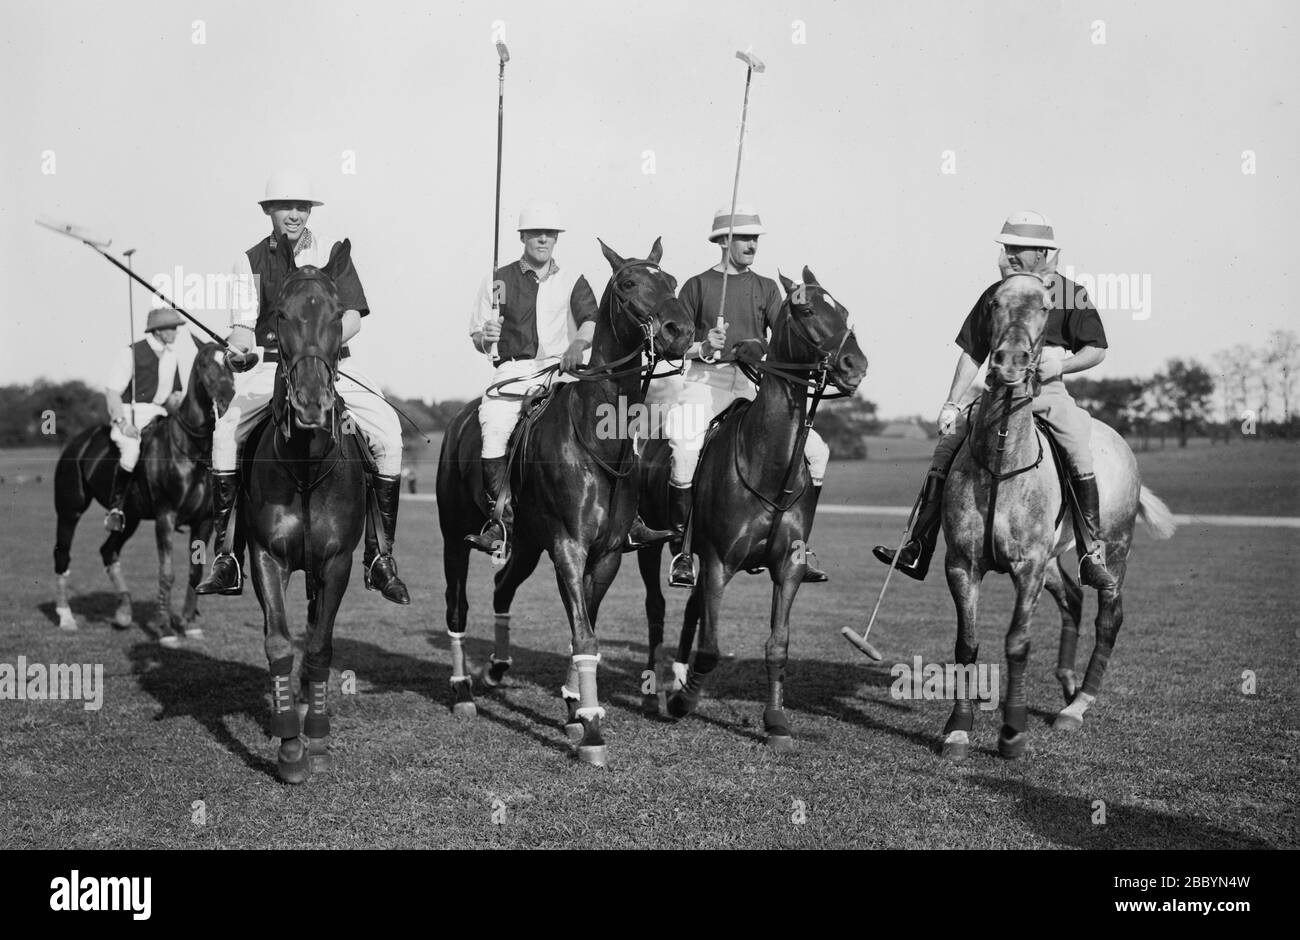 Edwards, Freake, and others -- Polo Players ca. 1910-1915 Stock Photo